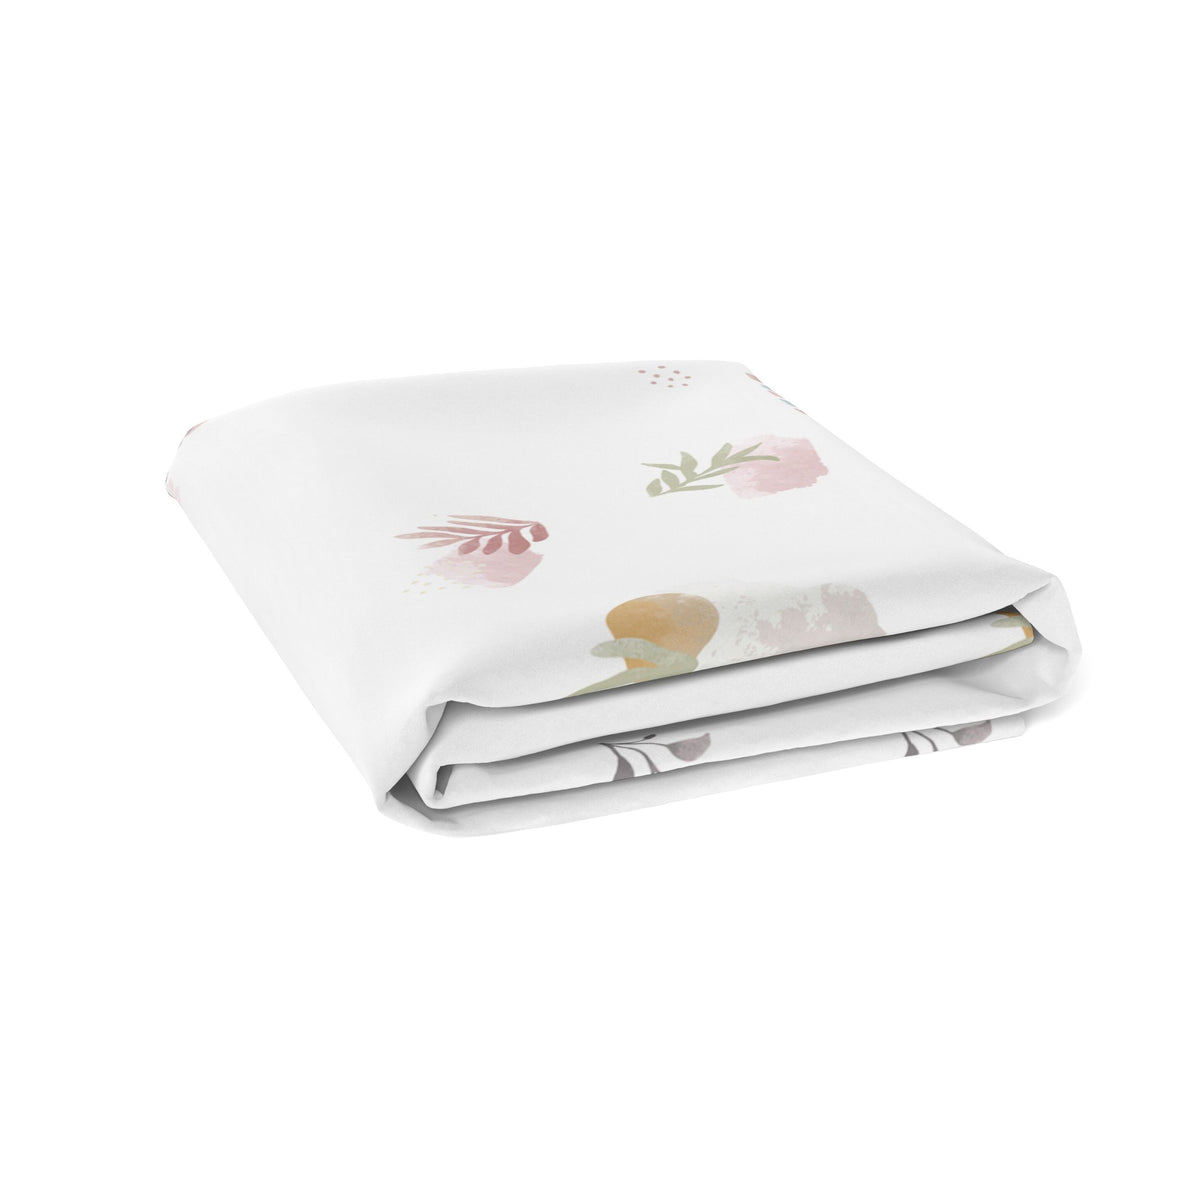 Percale Dream | Changing Pad Cover w-Slits for Safety Straps